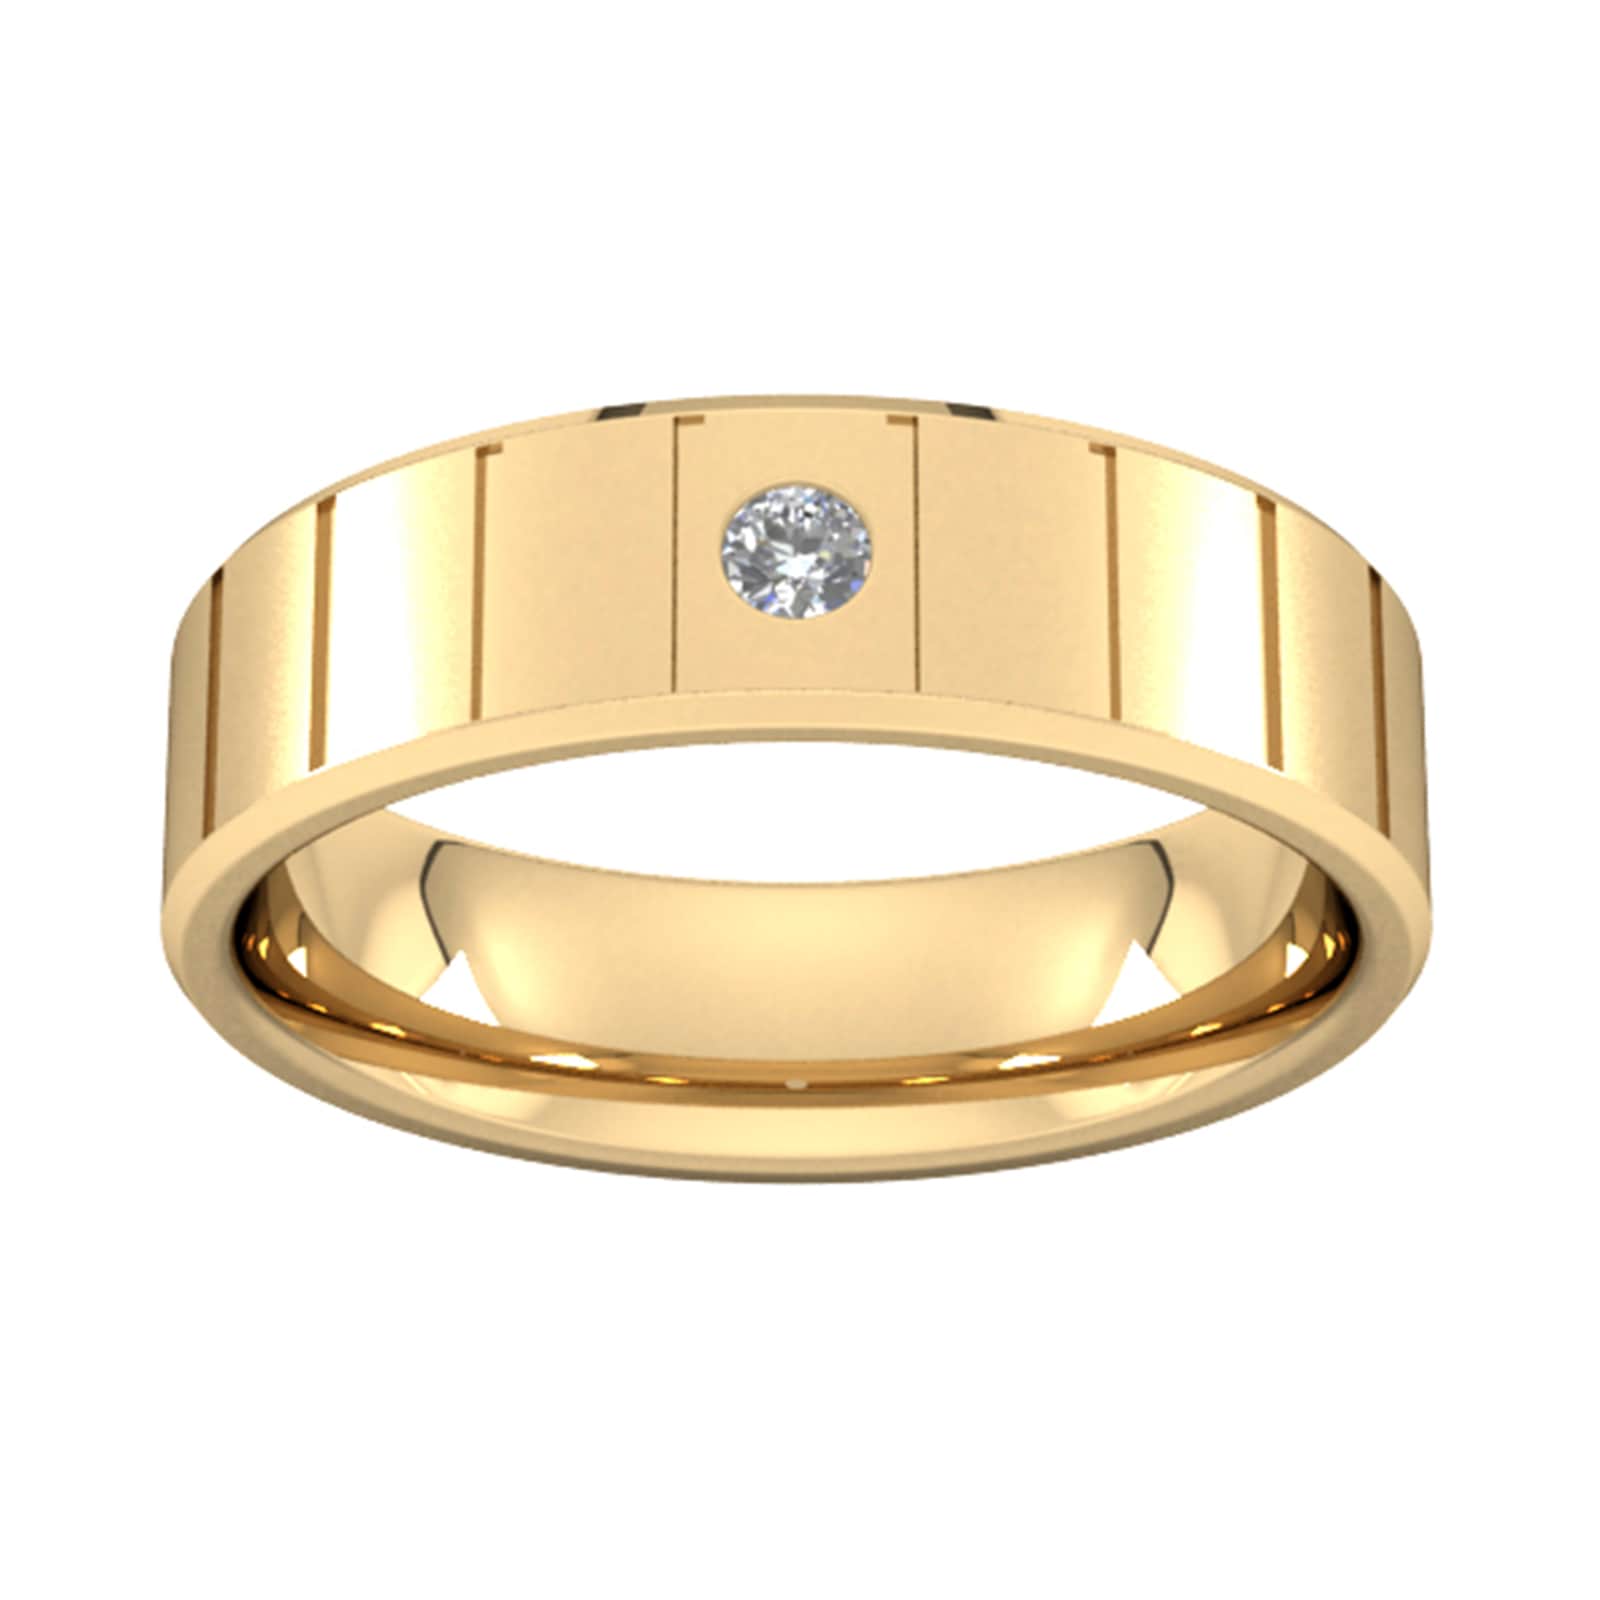 6mm Brilliant Cut Diamond Set With Vertical Lines Wedding Ring In 9 Carat Yellow Gold - Ring Size M